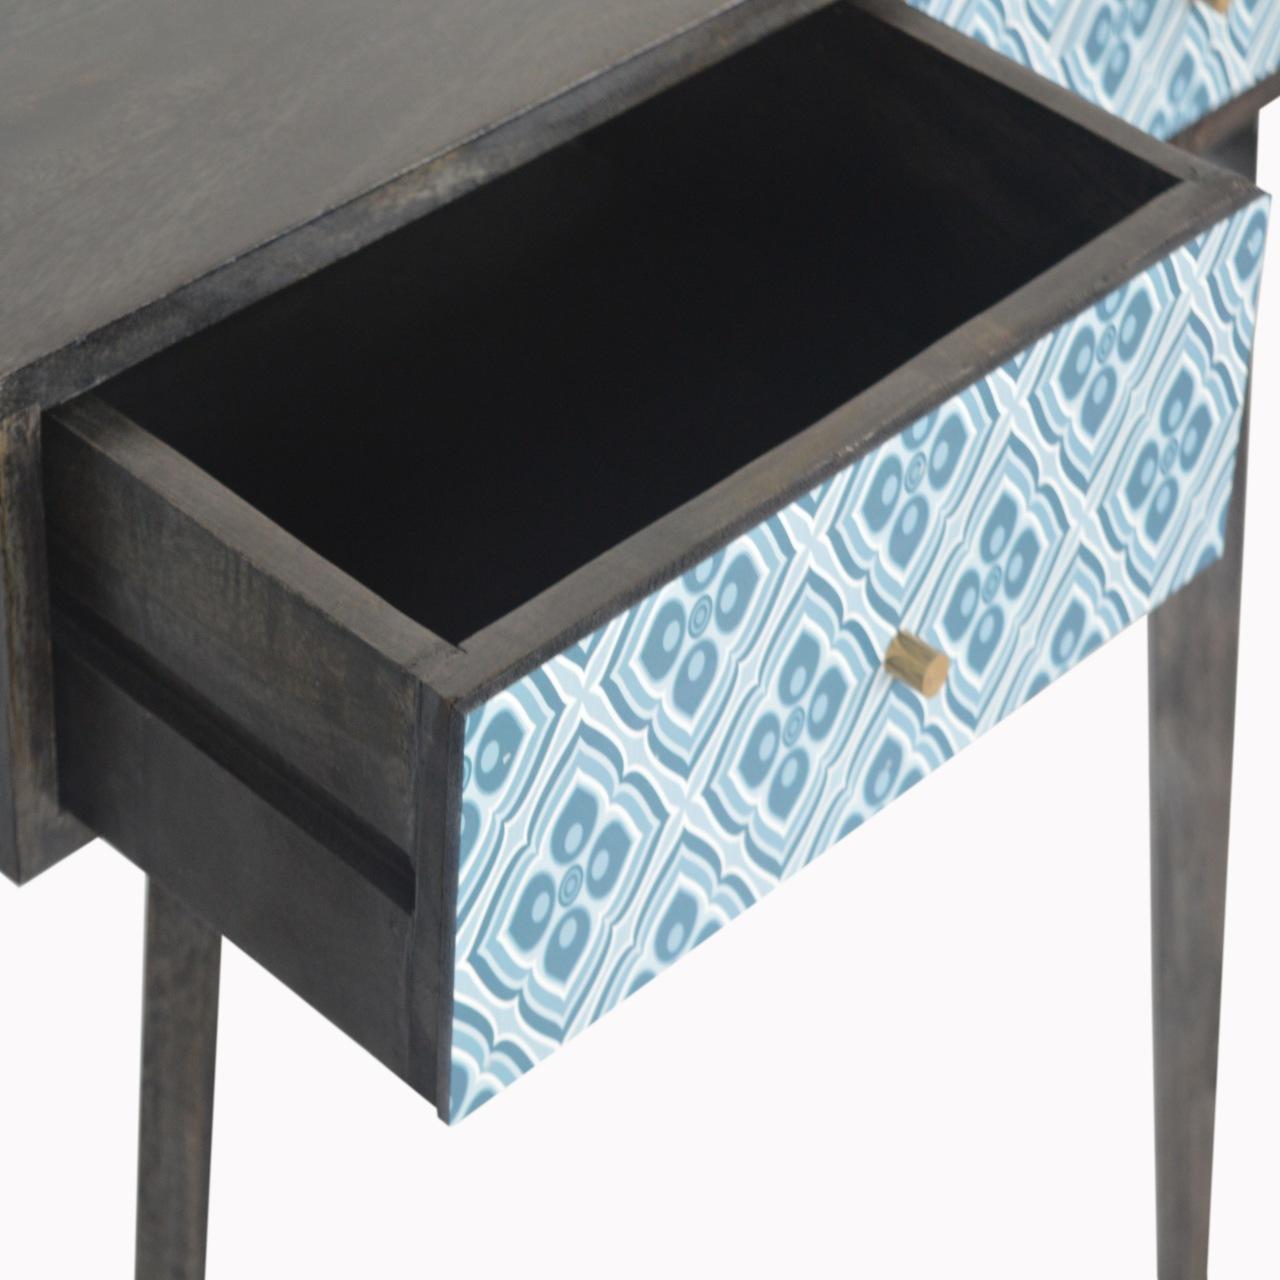 Riva Lucy Locket Console Table